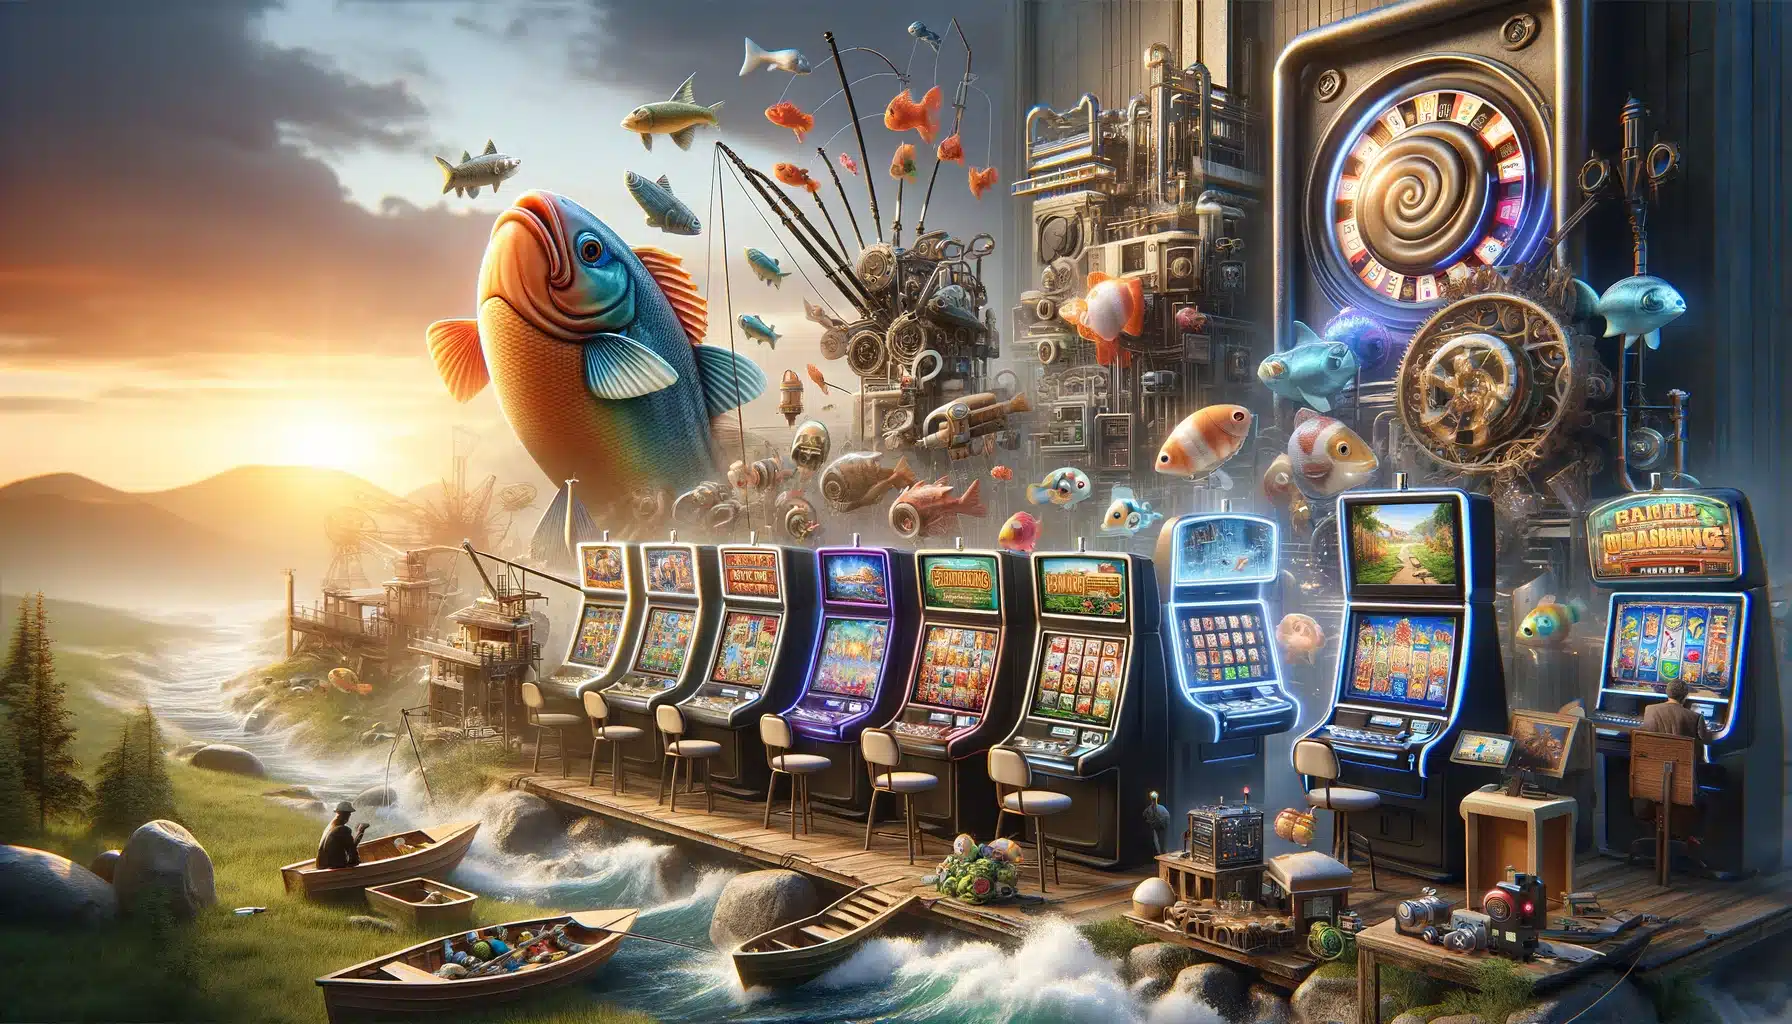 The Development of JILI Games Online Video Slot Machines and Fishing Games